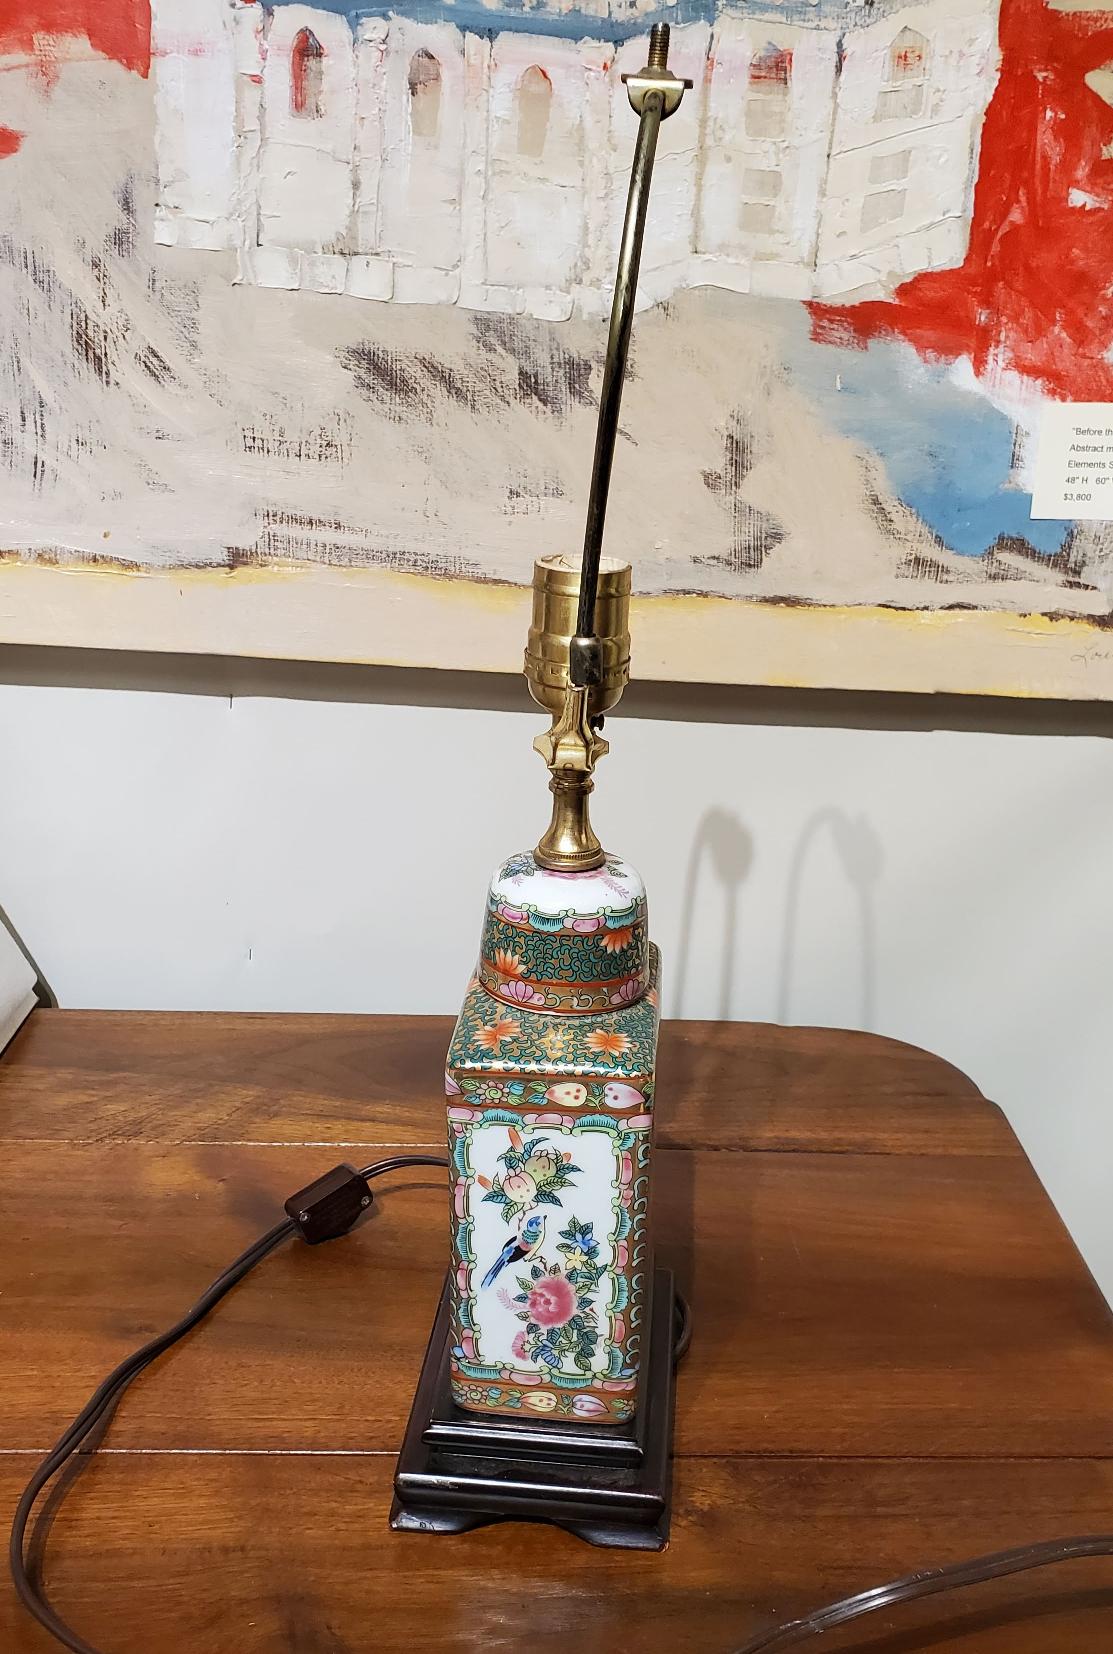 20th Century Small 19th Century Chinese Export Urn Converted to a Modern Lamp